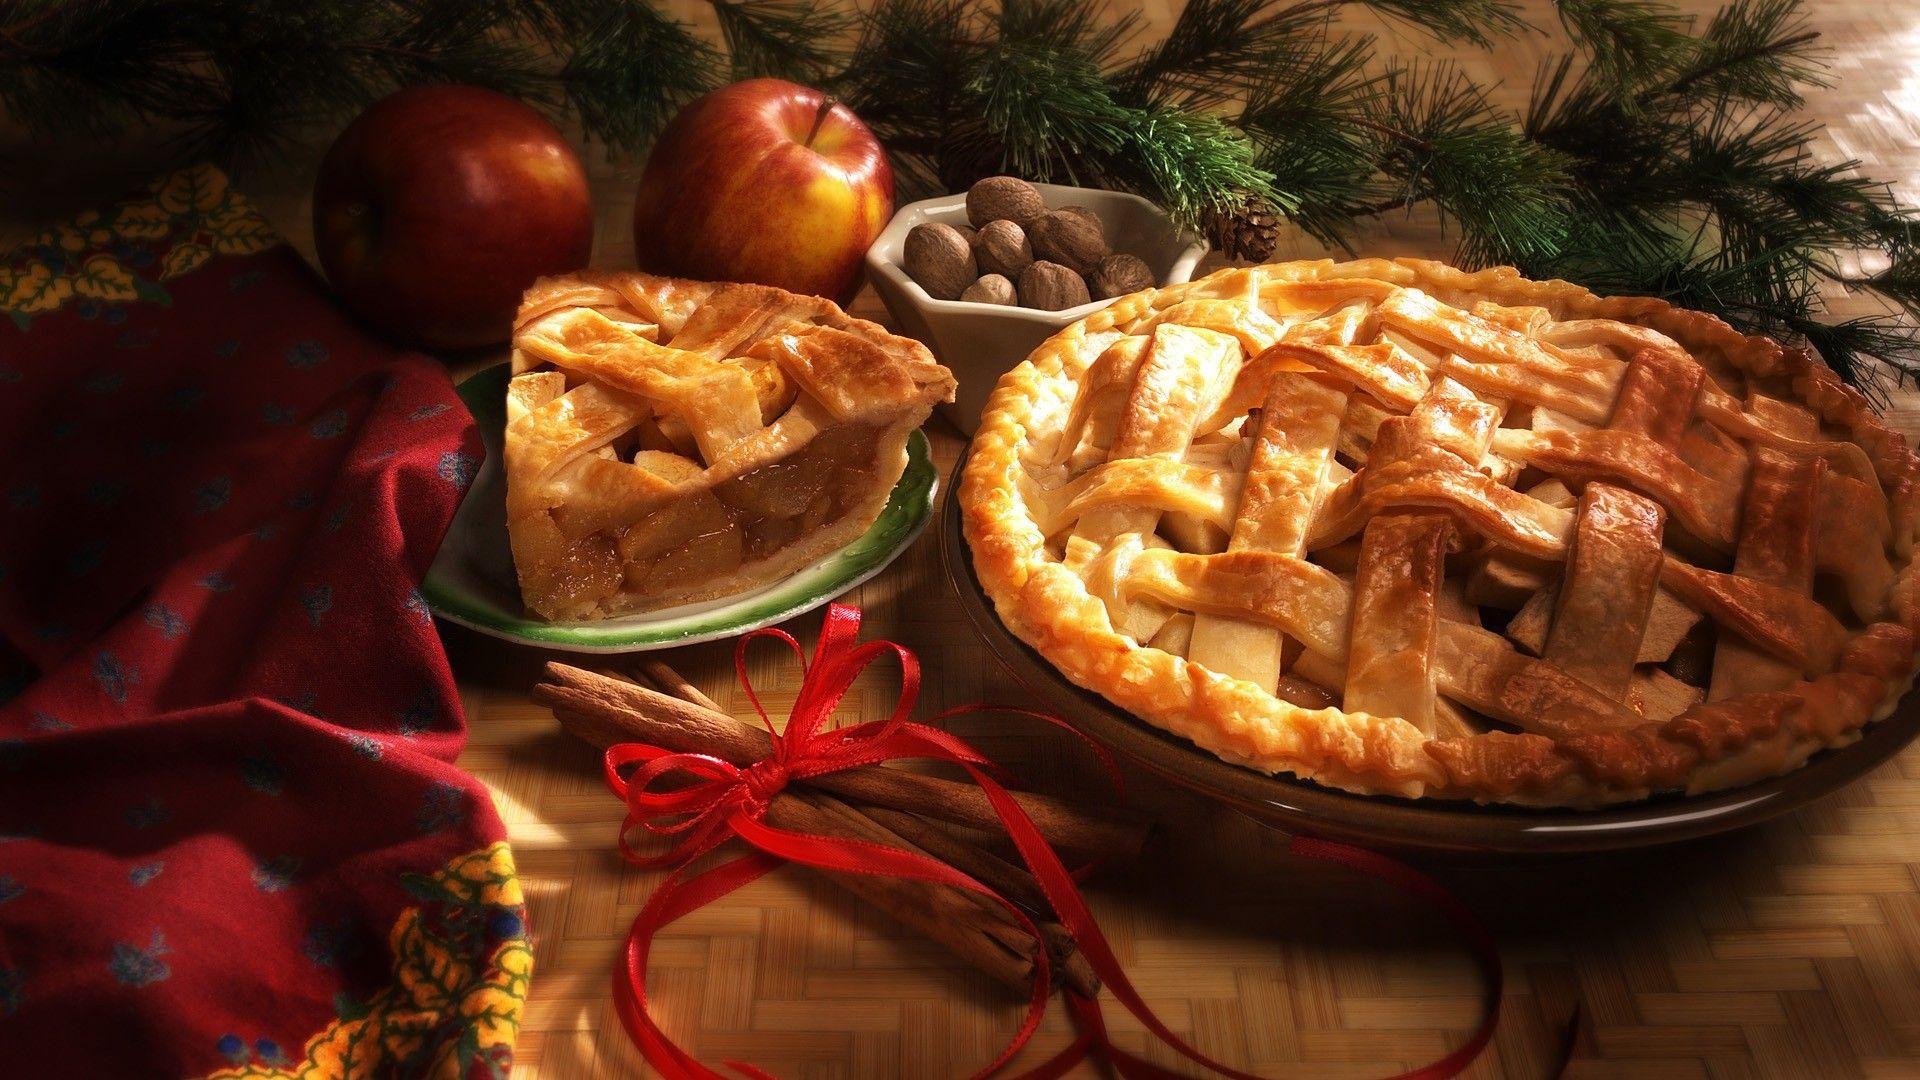 Christmas apple pie wallpaper and image, picture, photo